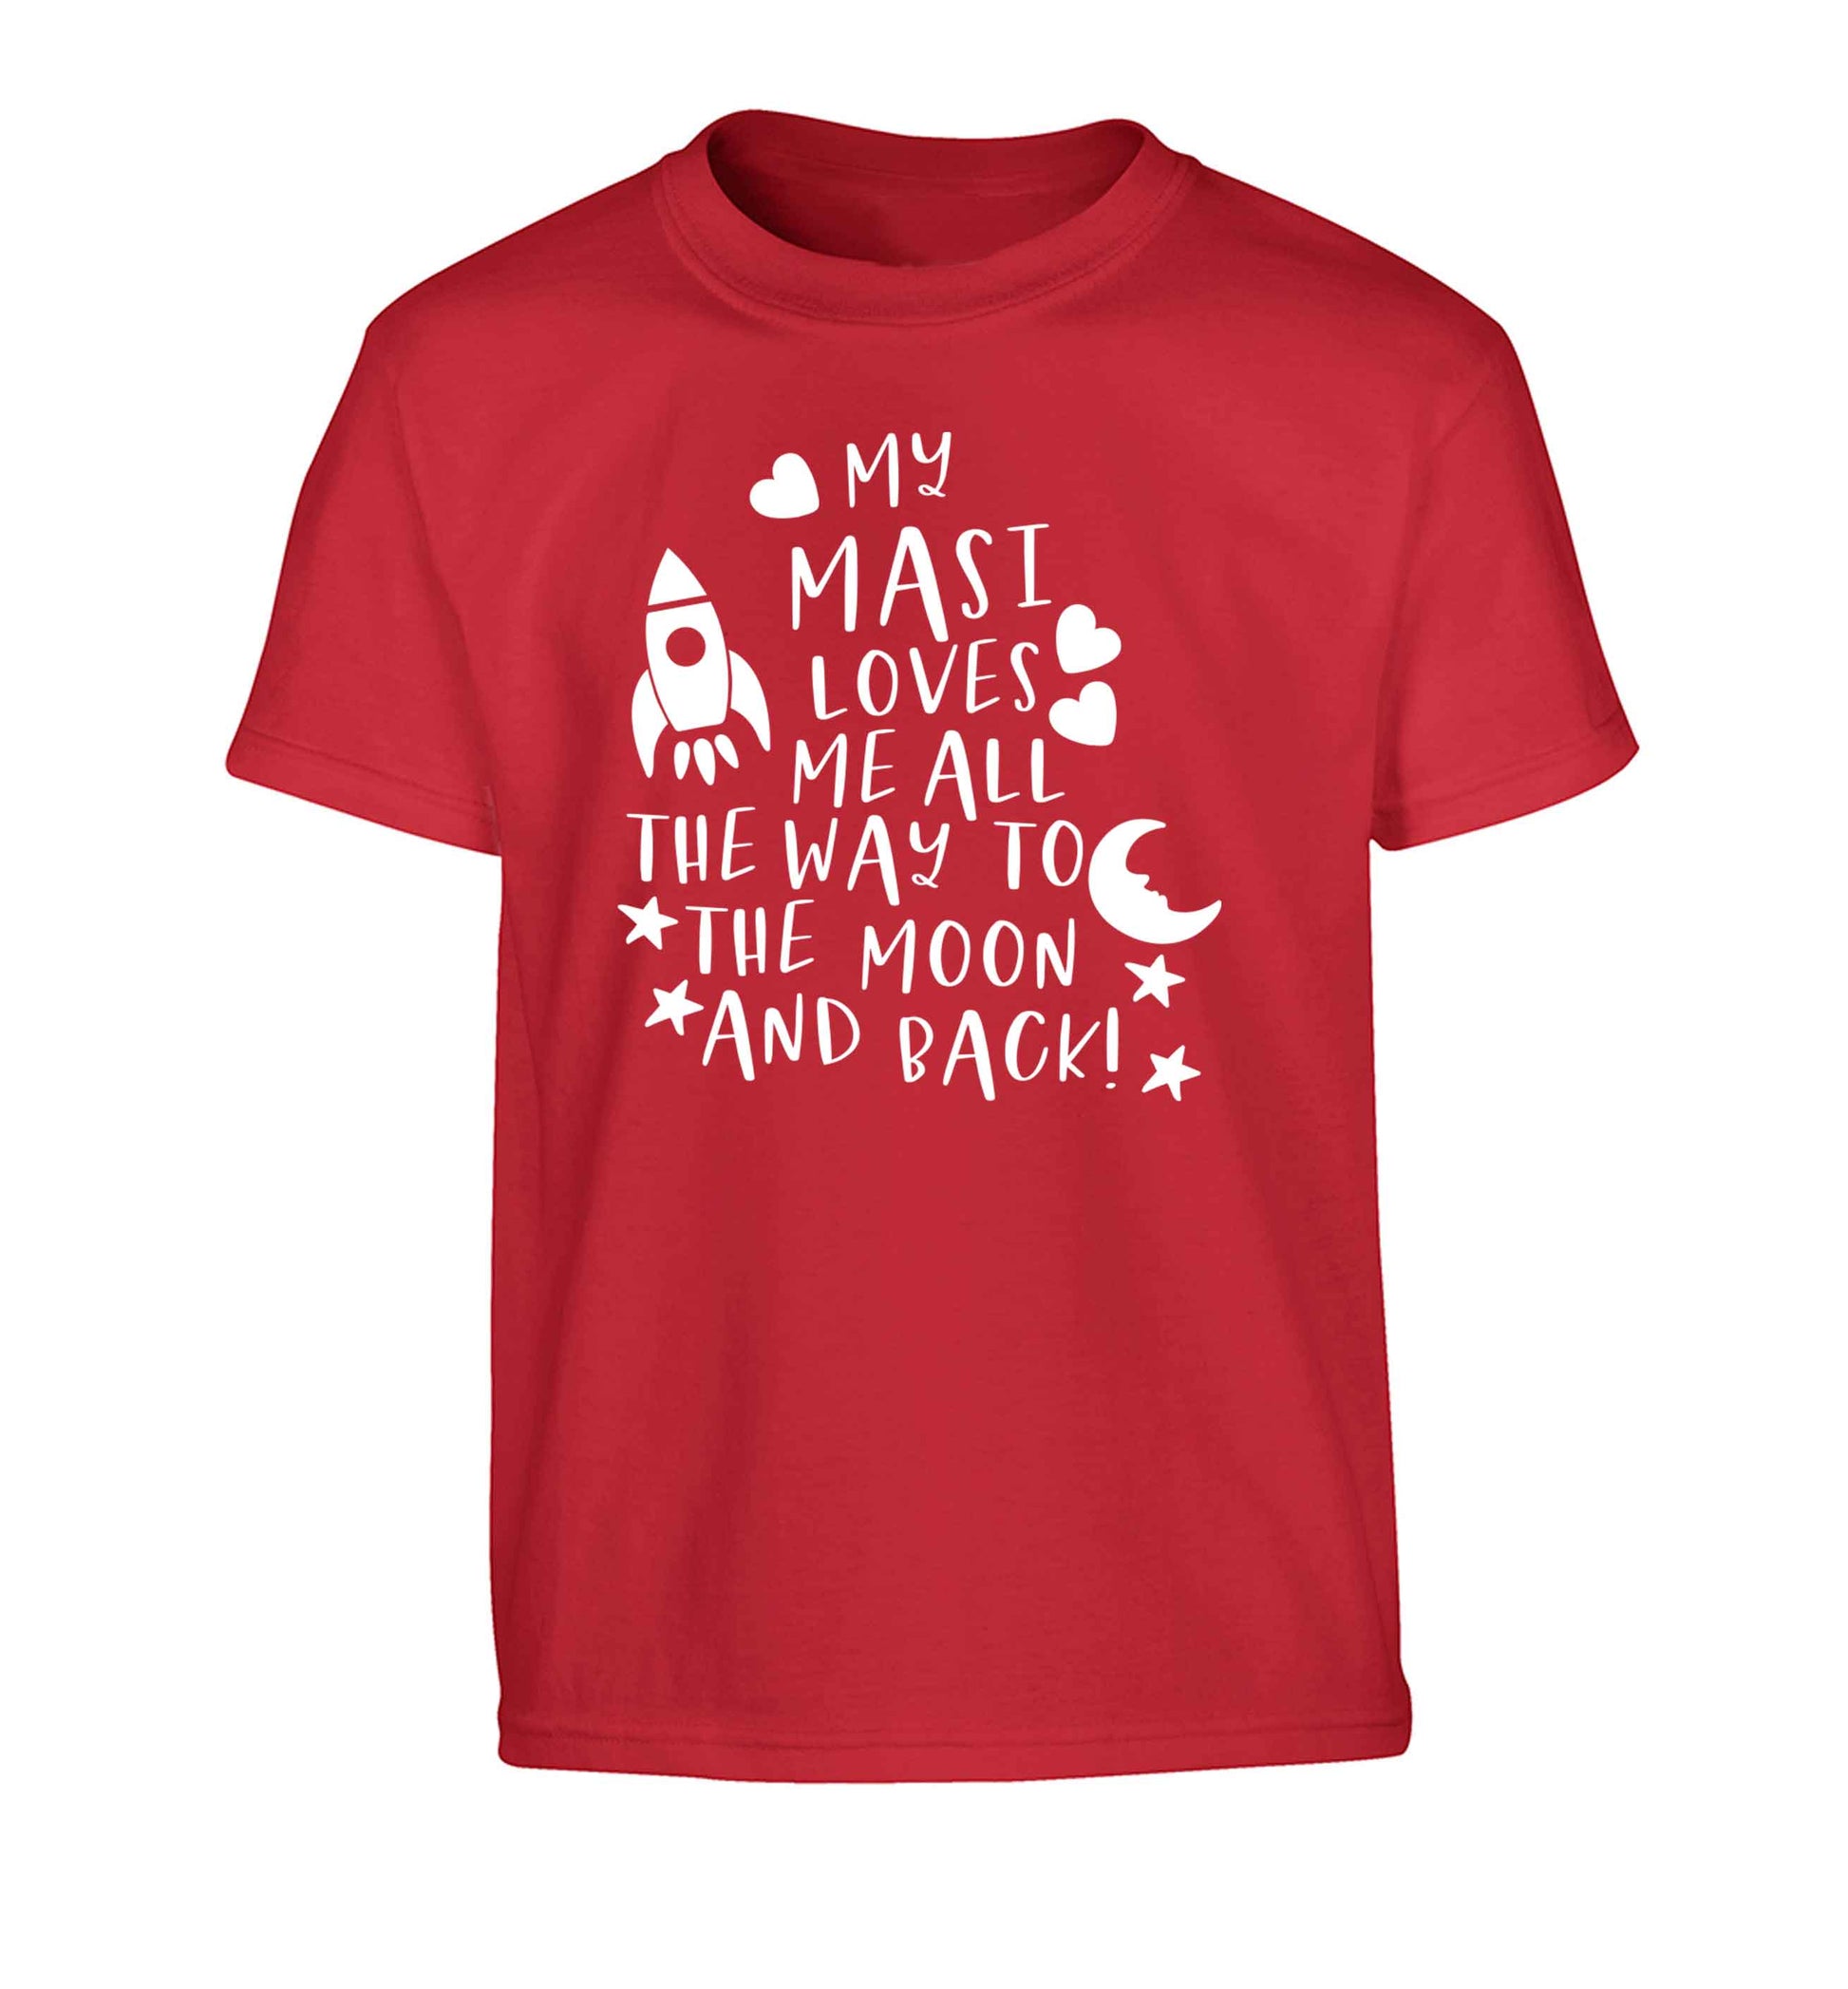 My masi loves me all the way to the moon and back Children's red Tshirt 12-13 Years